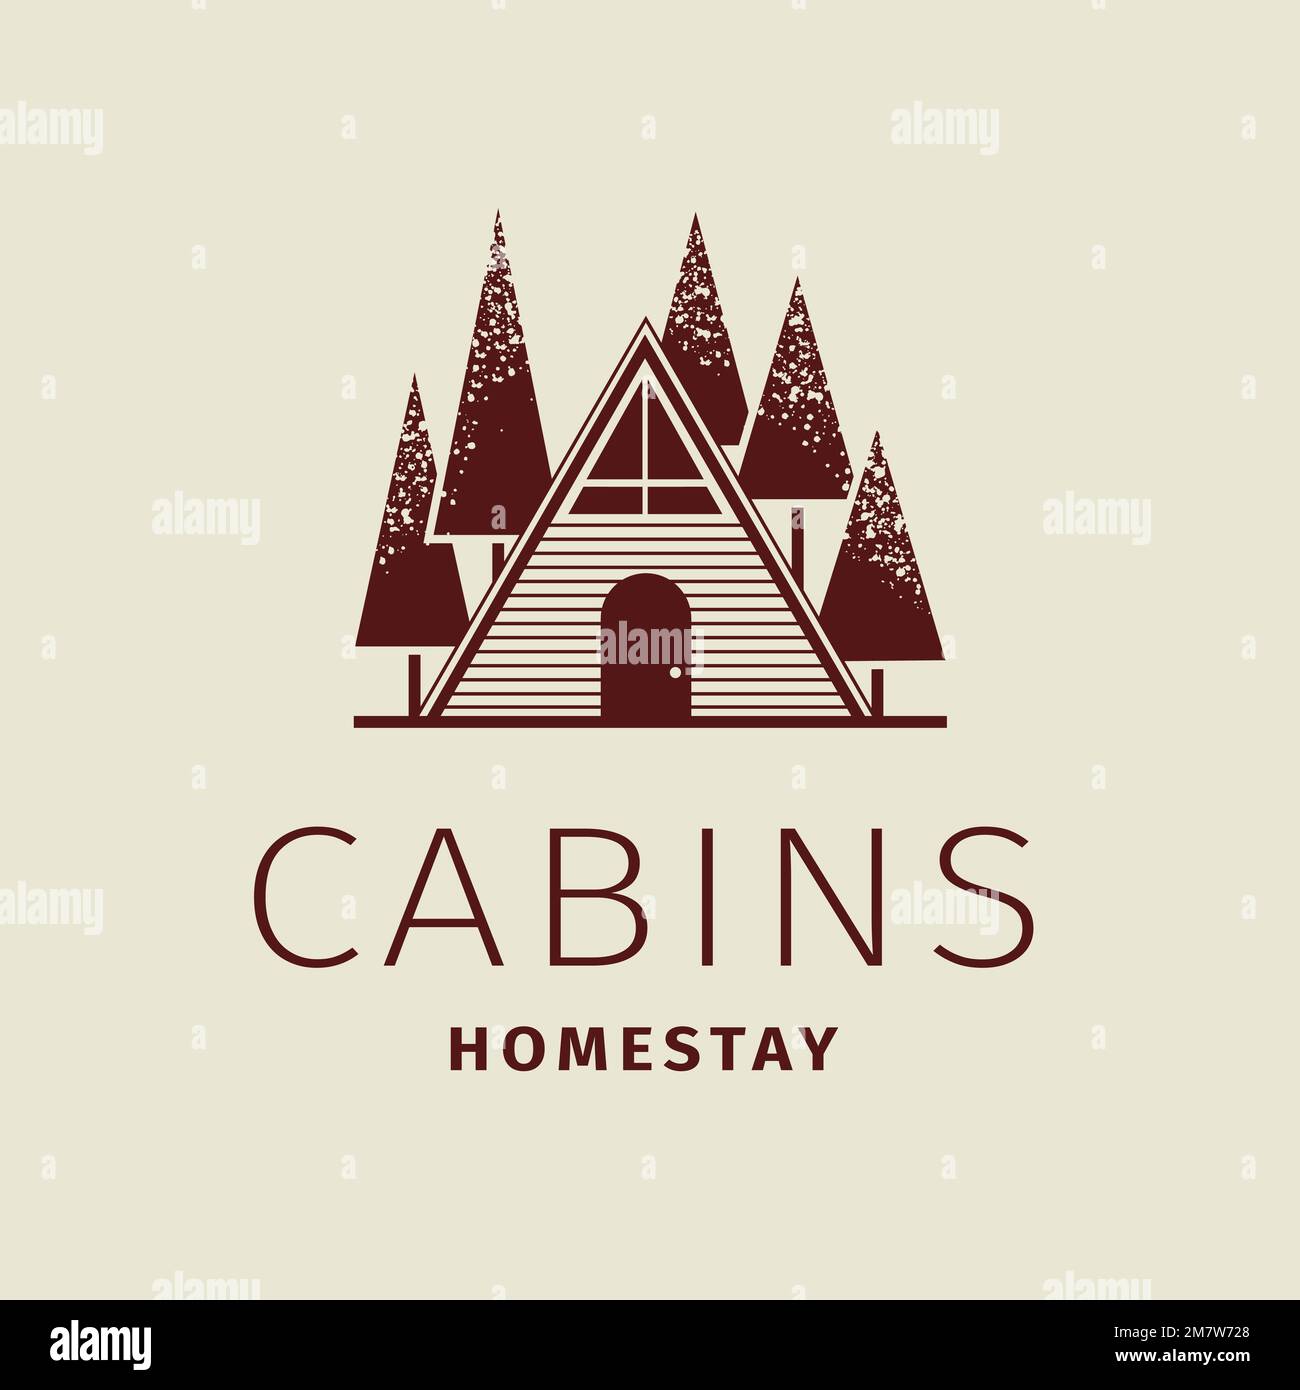 Editable hotel logo vector business corporate identity with cabins homestay text Stock Vector